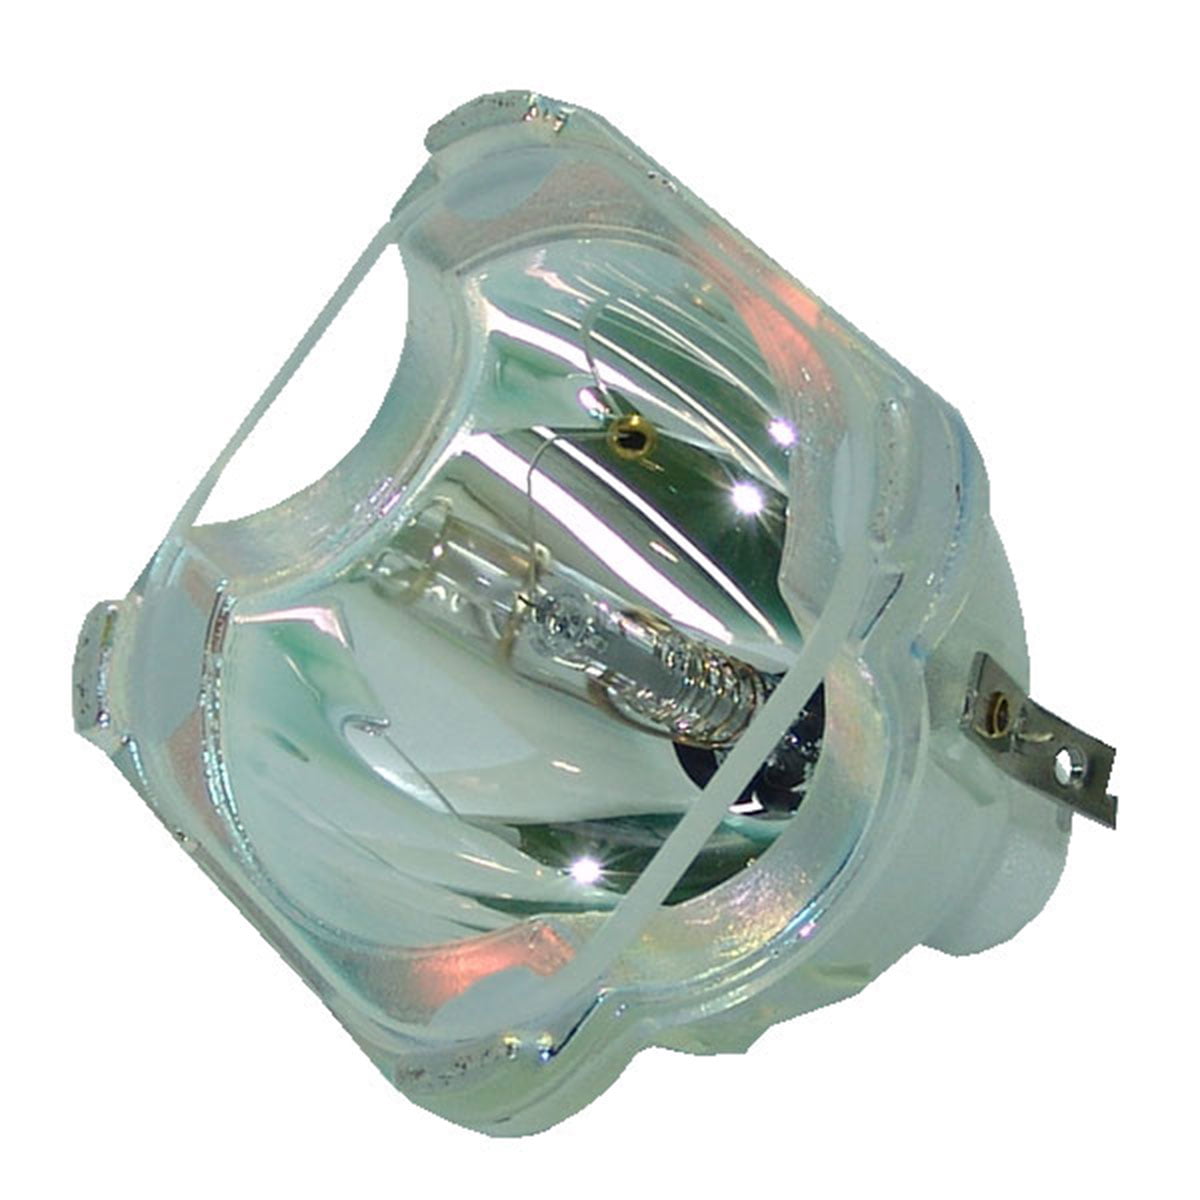 Mitsubishi WD-73638 TV Lamp with Housing with 150 Days Warranty 